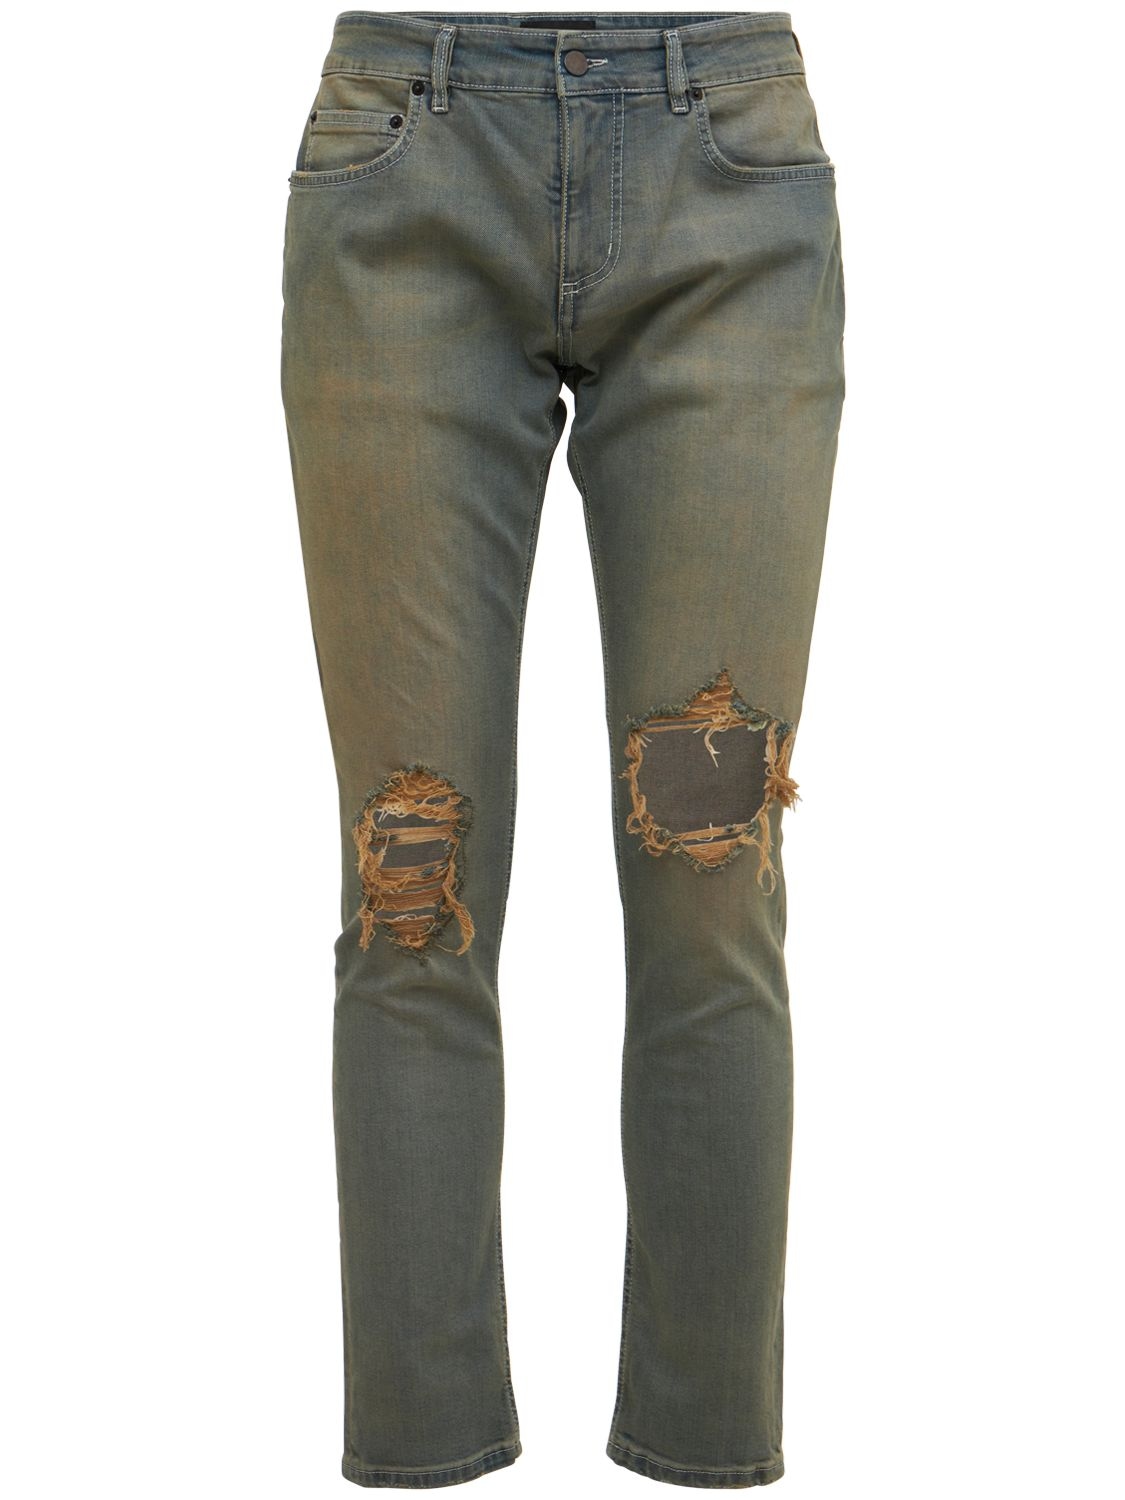 Mille900quindici Washed Jeans W/ Distressed Knees In Blue,multi